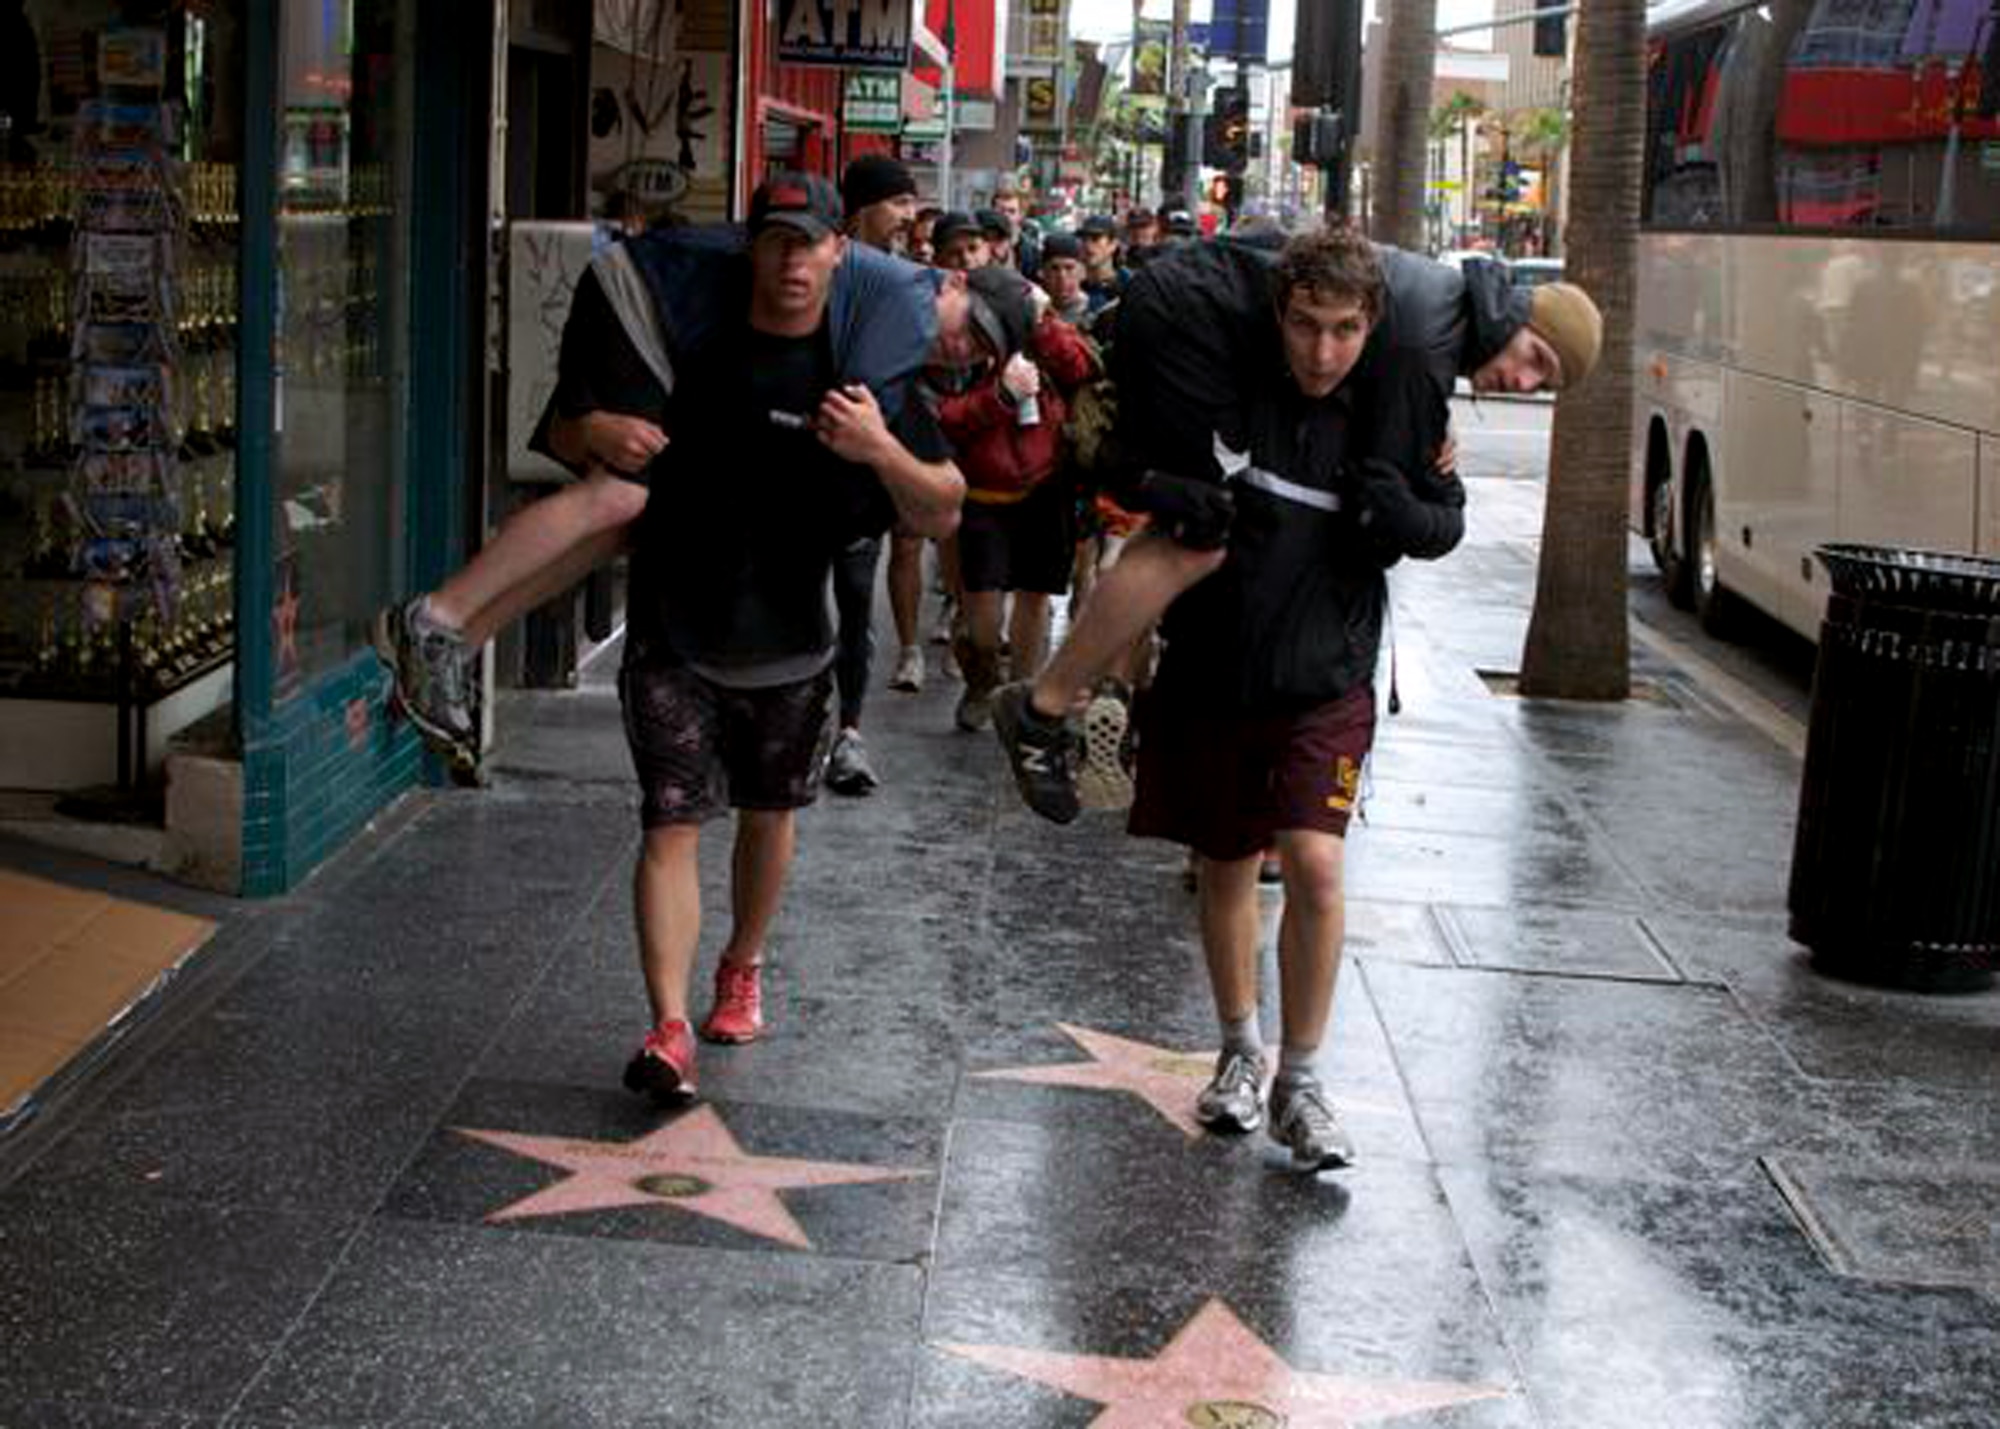 Participants in the GORUCK Challenge in Los Angeles buddy-carry each other down Hollywood's “Walk of Fame” as a feat in the challenge. Edwards Airmen 1st Lt. Paul Issler from the 412th Test Management Division and 1st Lt. Erin Wallace, 773rd Test Squadron, competed in the rucksack march through the city. The challenge involved performing calisthenics and carrying weight on their back for more than 12 hours. (Courtesy photo)